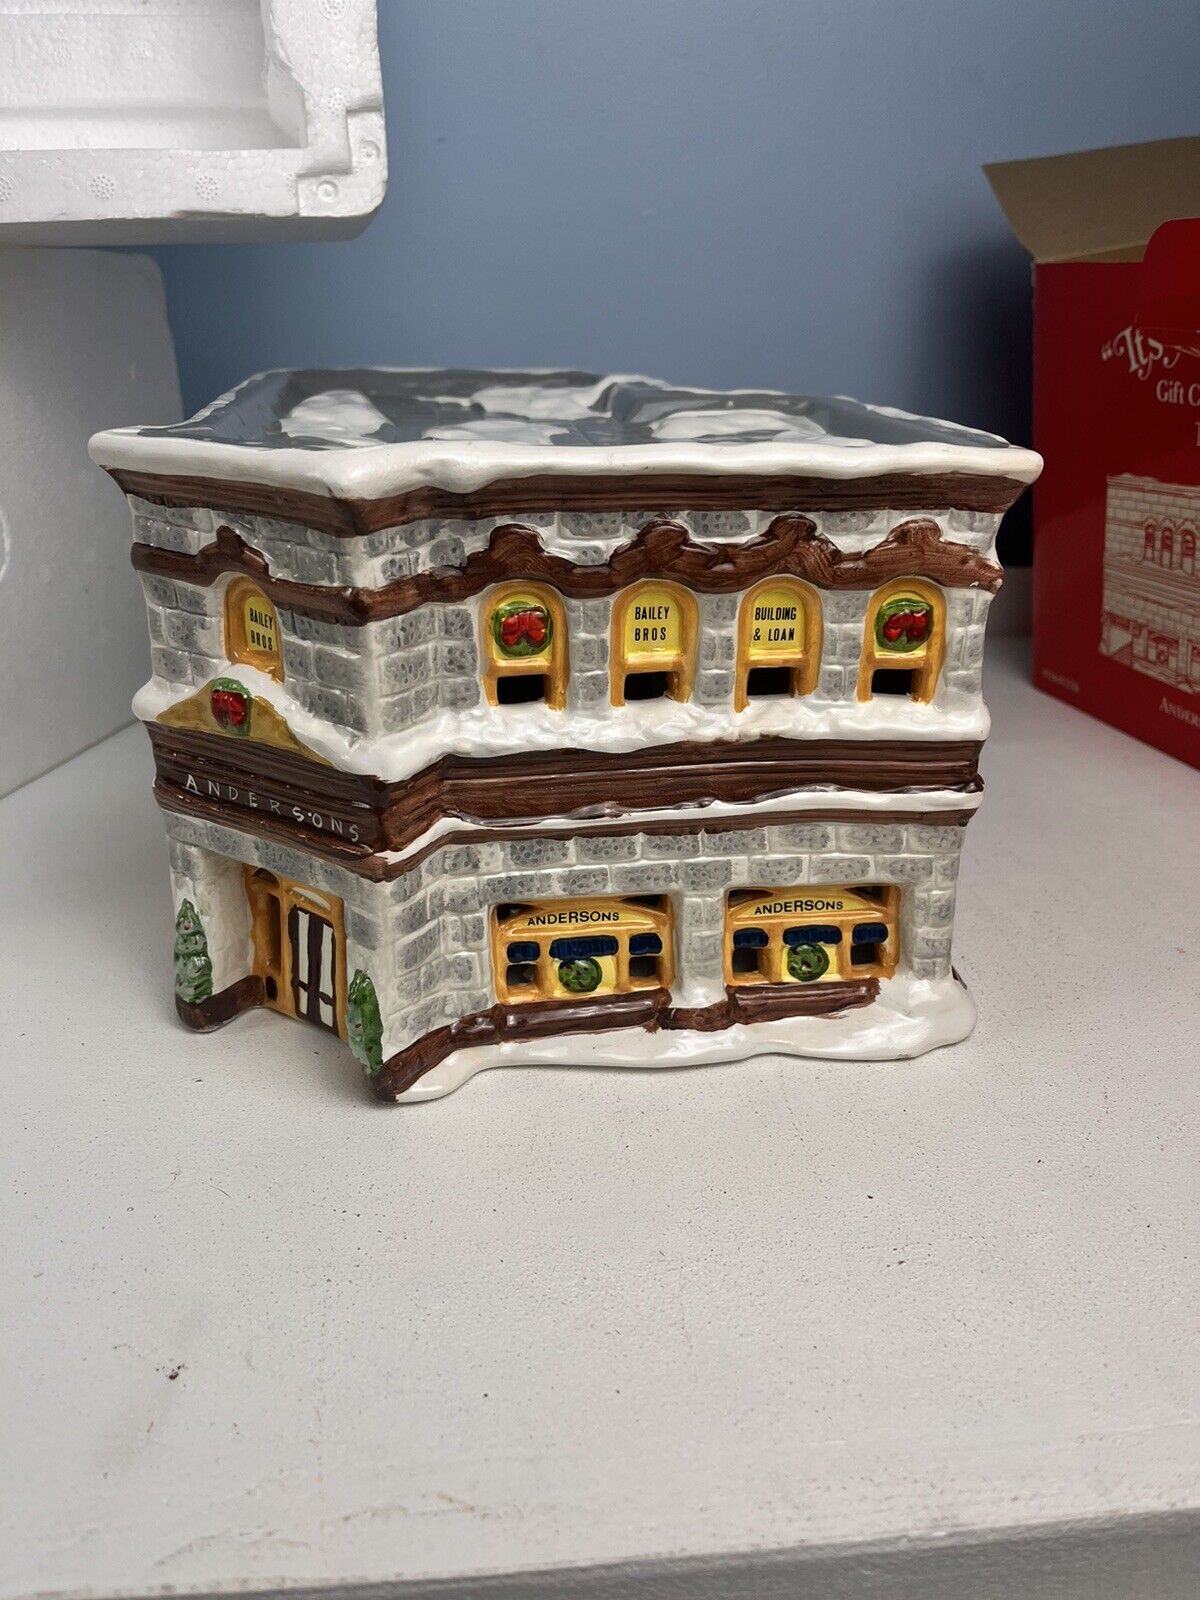 Cape Craftsman It's a Wonderful Life 1993 Andersons and Building & Loan #1570 